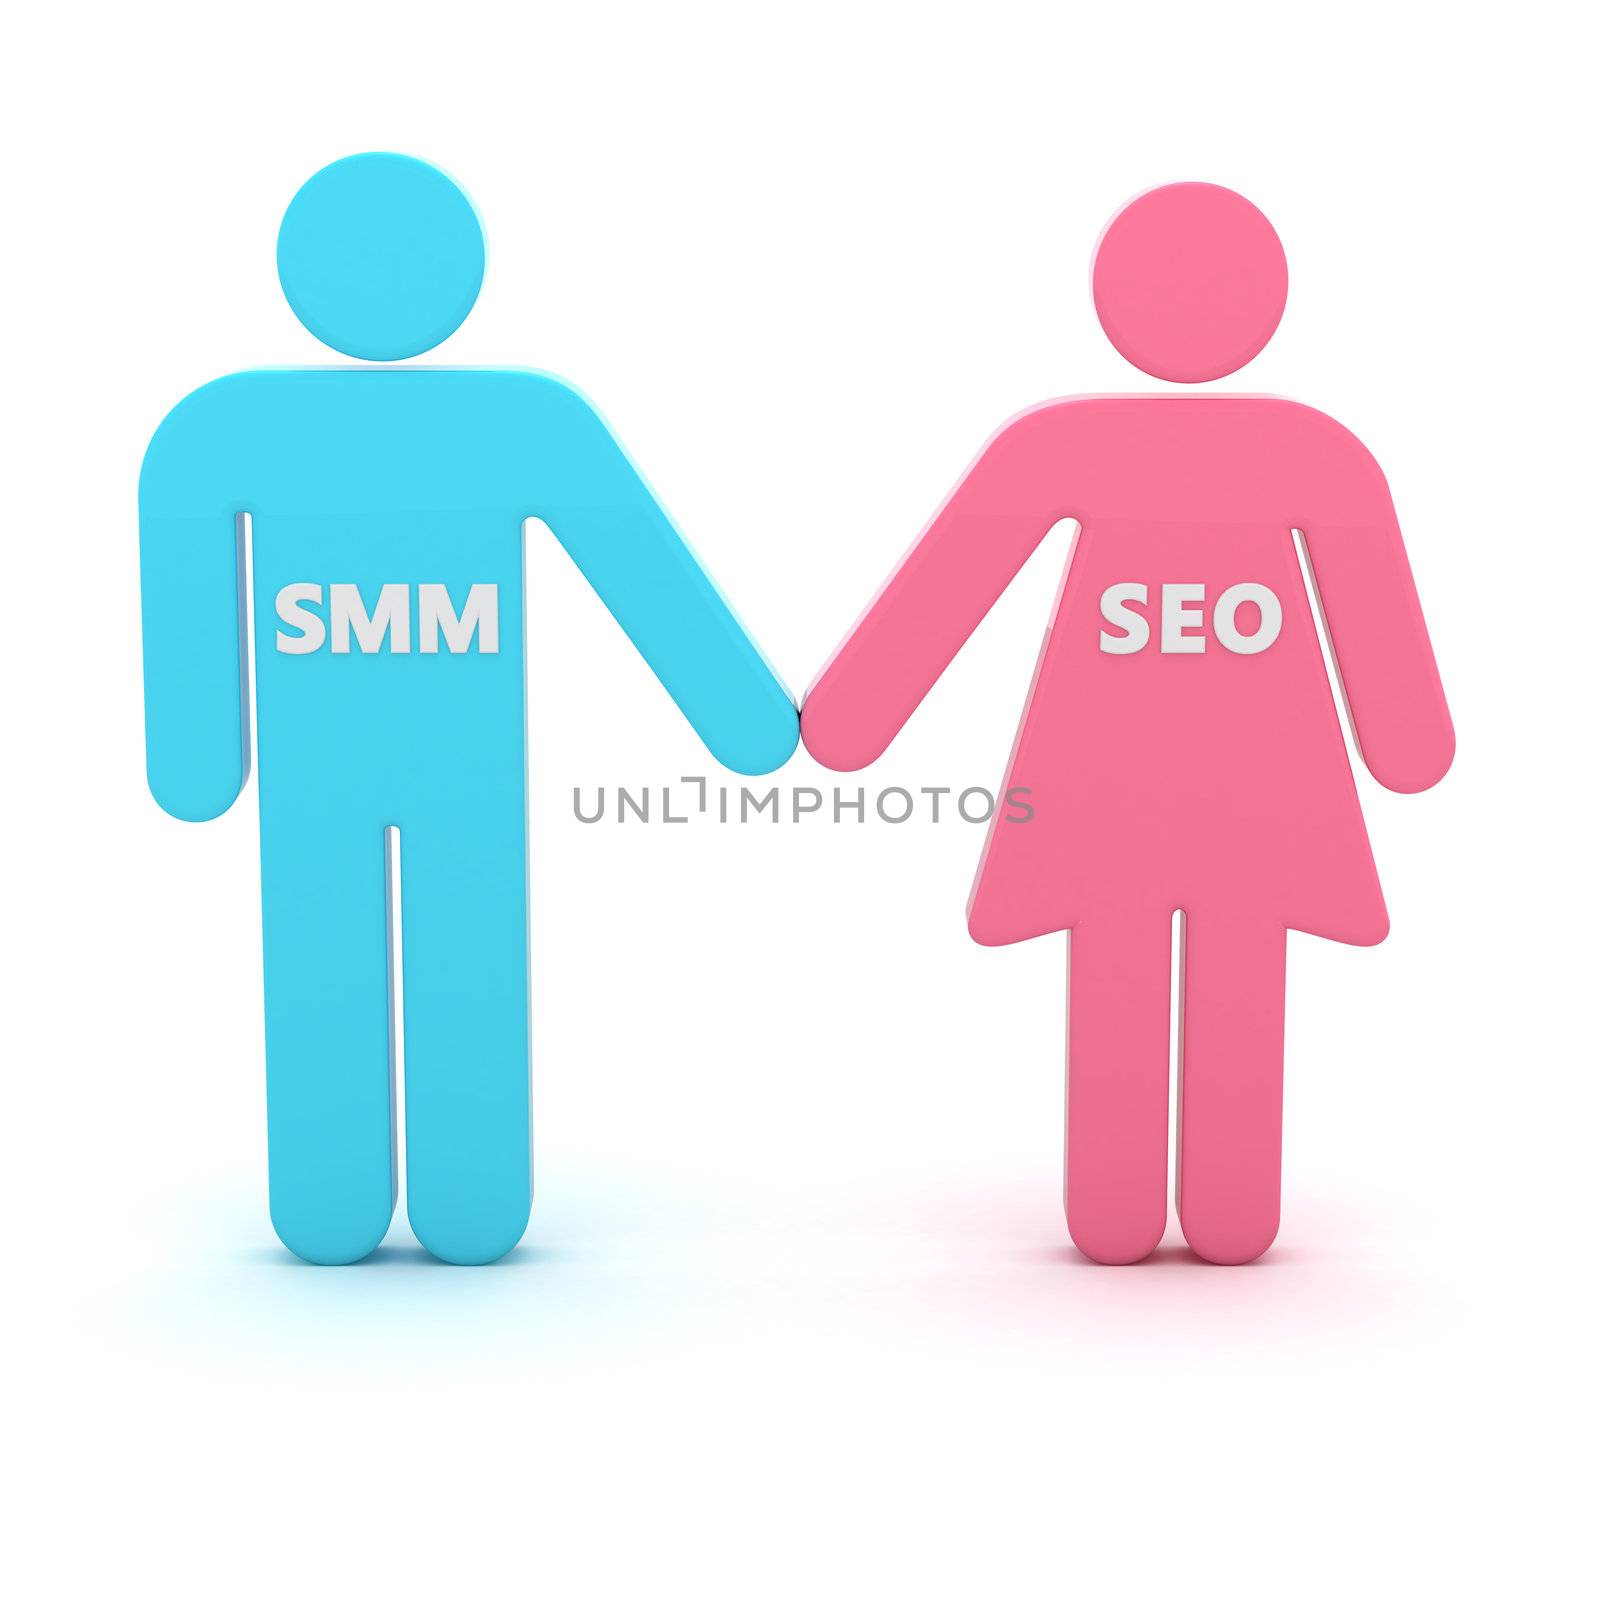 SMM and SEO are advanced web technologies